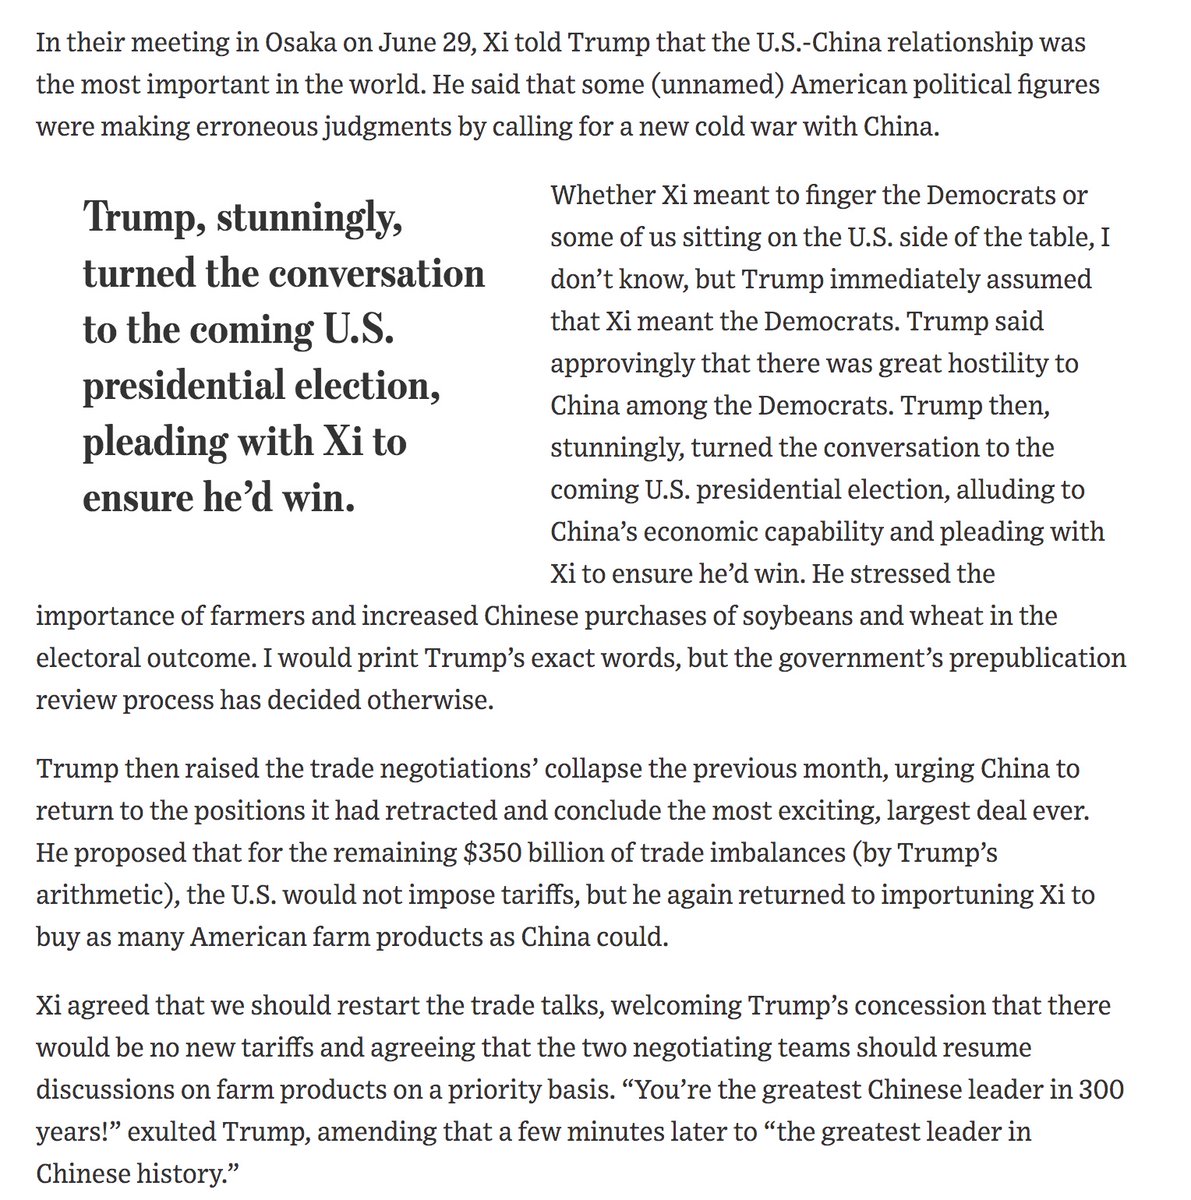 5. Details from Bolton book excerpt on how Trump caved to Xi on trade in order to get minor farm purchases from China to secure farm-state votes. Note how all the Chinese officials "perked up and smiled" when Trump said Kushner would help w/ negotiations.  https://www.wsj.com/articles/john-bolton-the-scandal-of-trumps-china-policy-11592419564